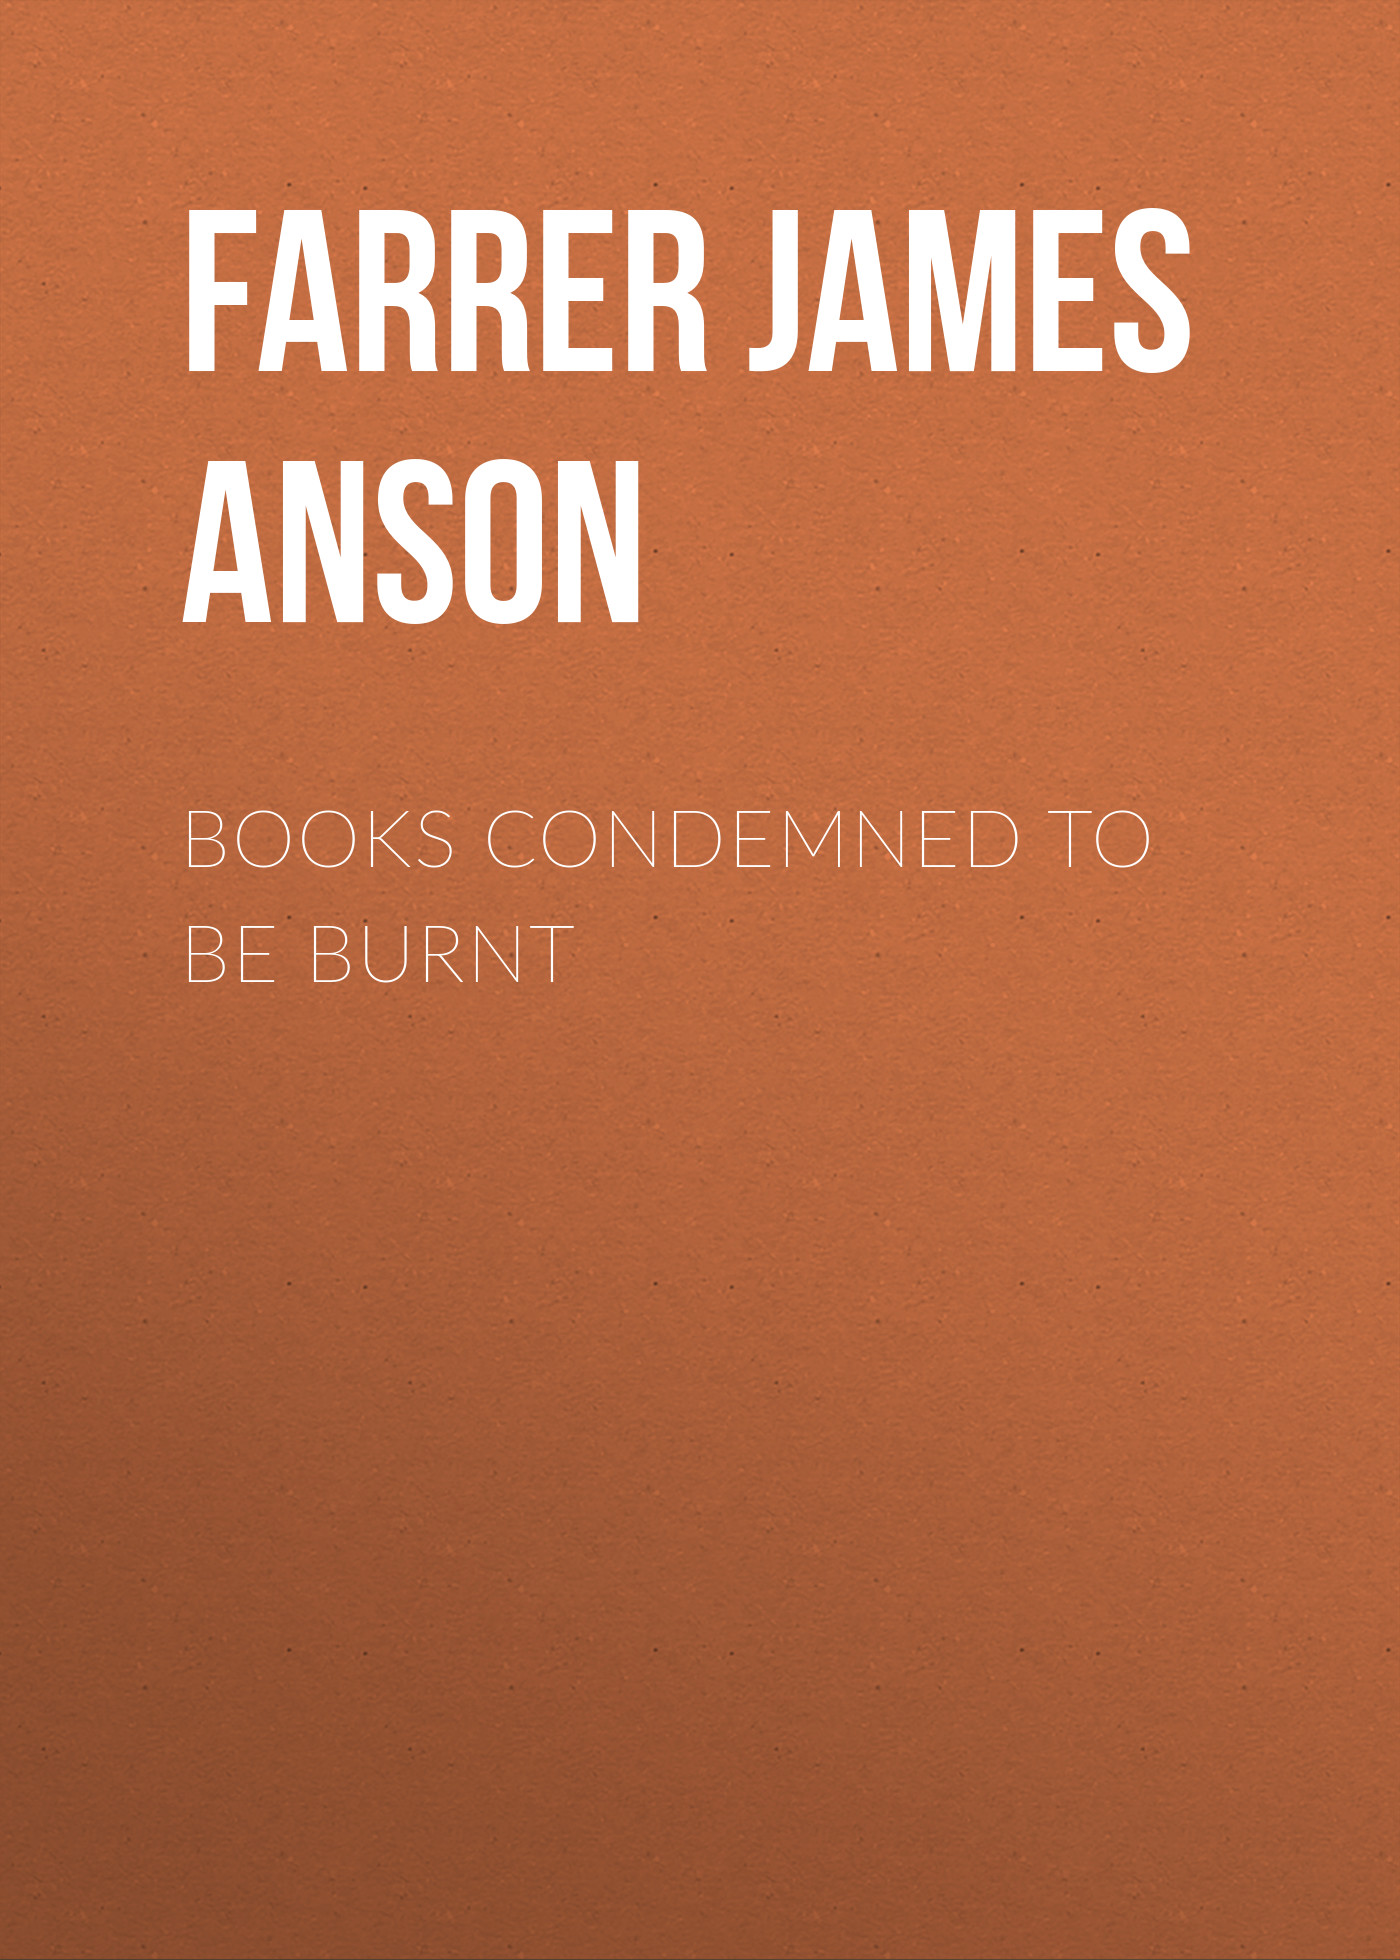 Farrer James Anson Books Condemned to be Burnt